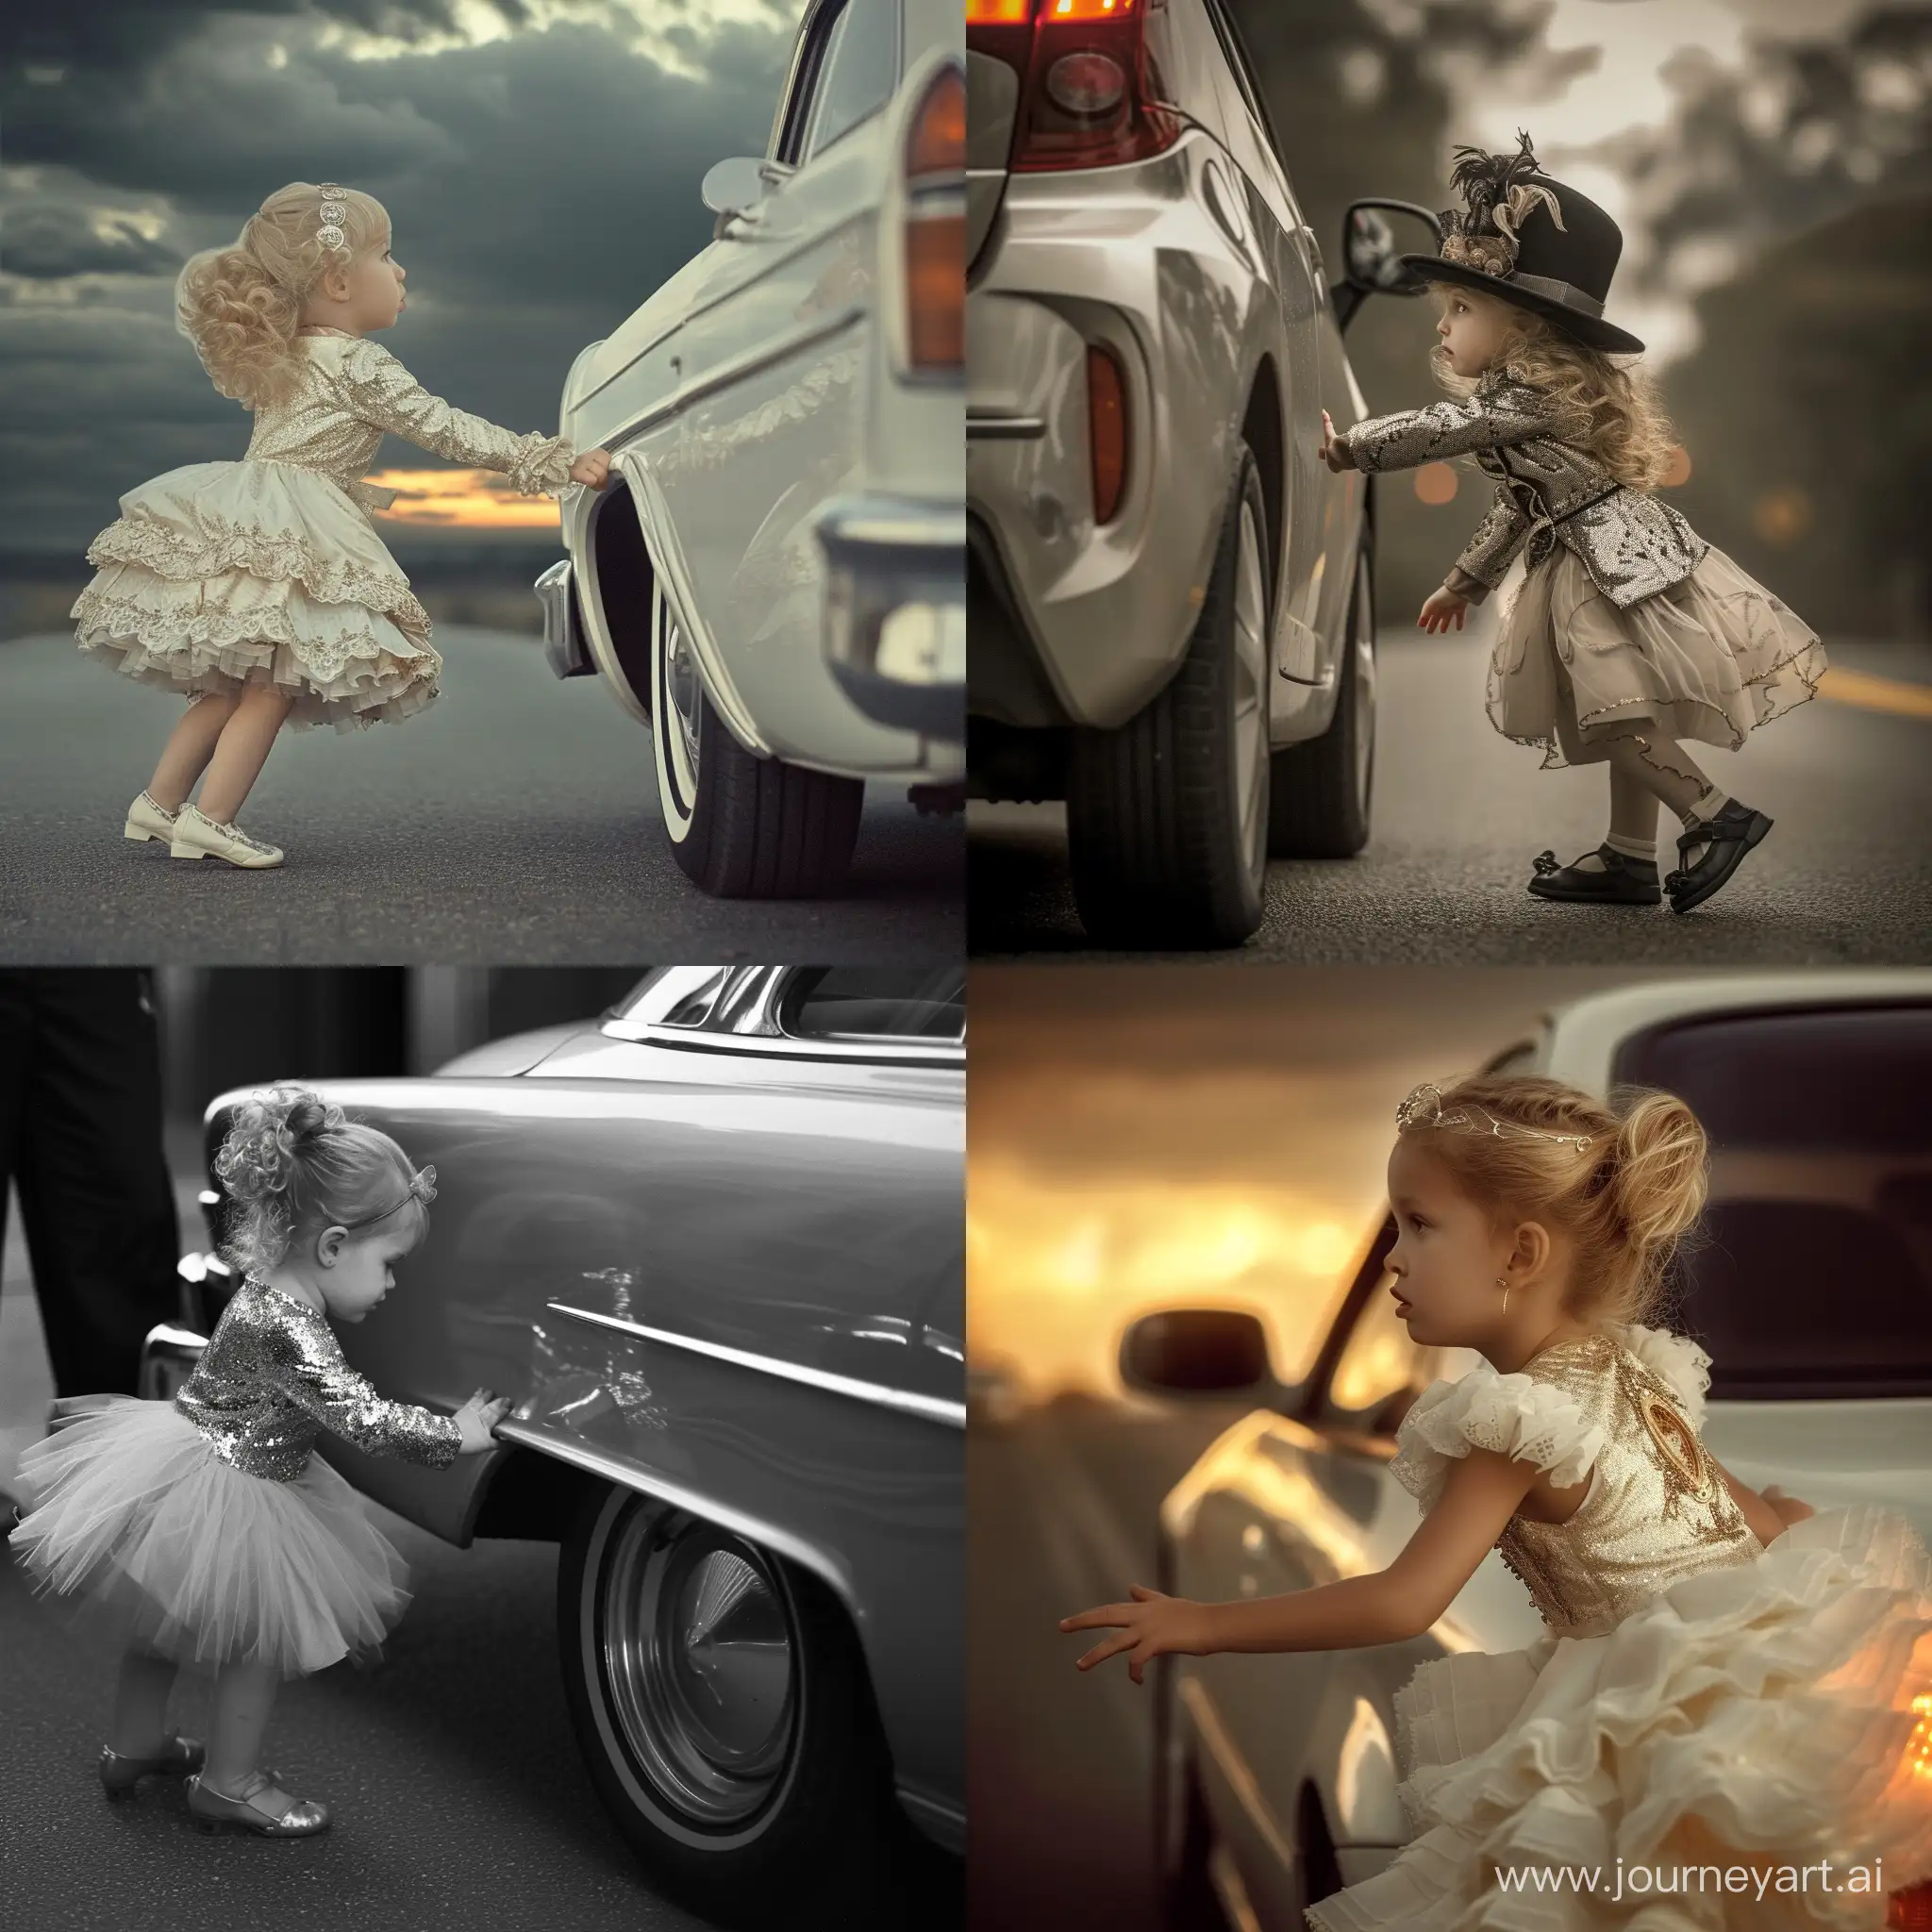 Chic-Young-Girl-Flagging-Down-a-Car-with-Glamorous-Style